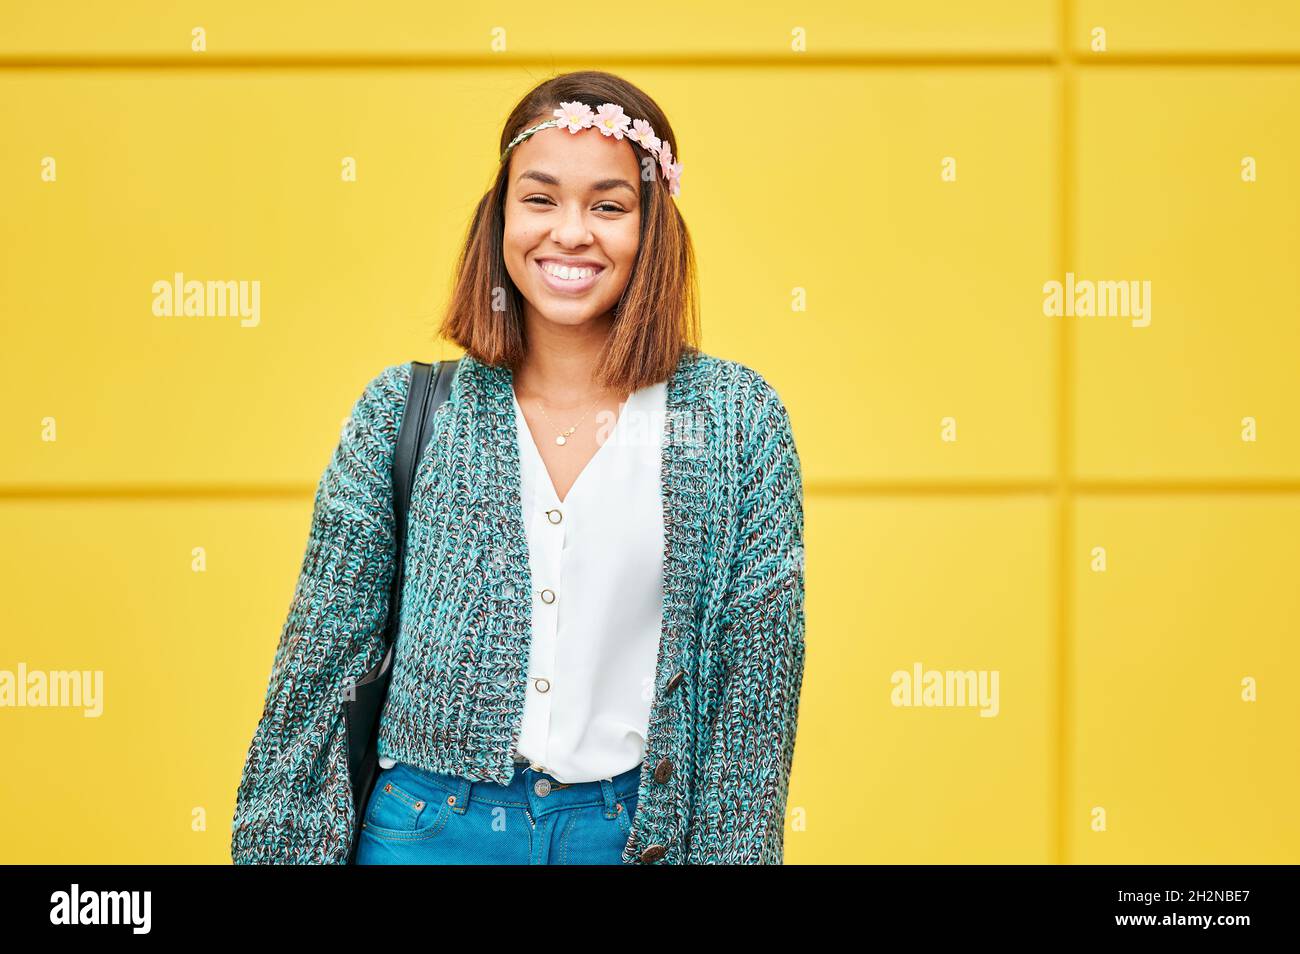 Smiling woman wearing flower tiara standing in front of yellow wall Stock Photo